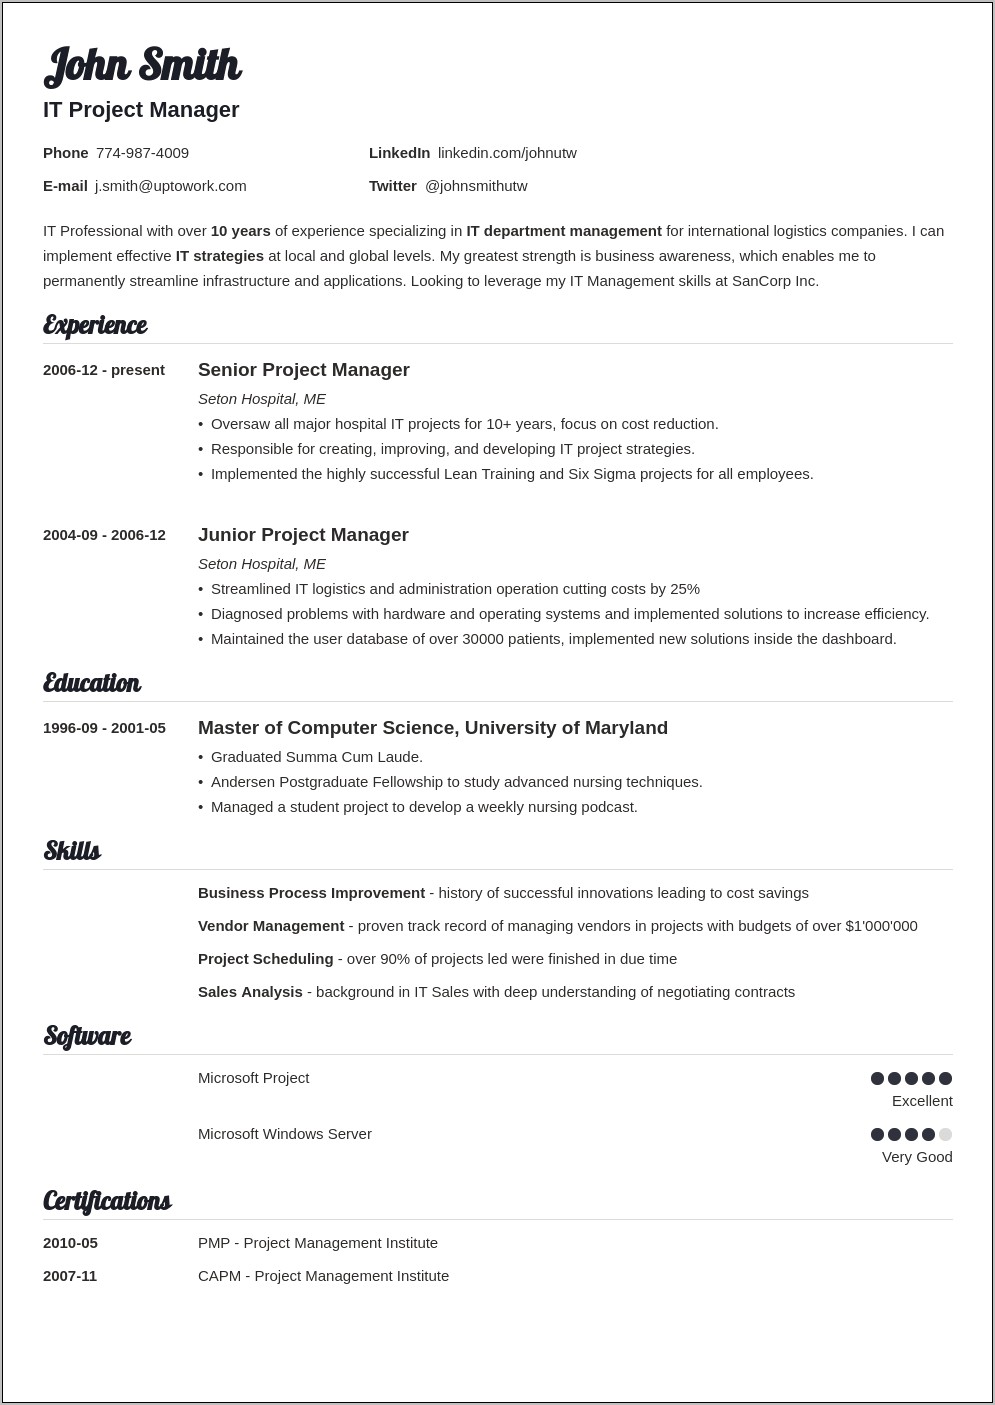 Resume Template With No White Space